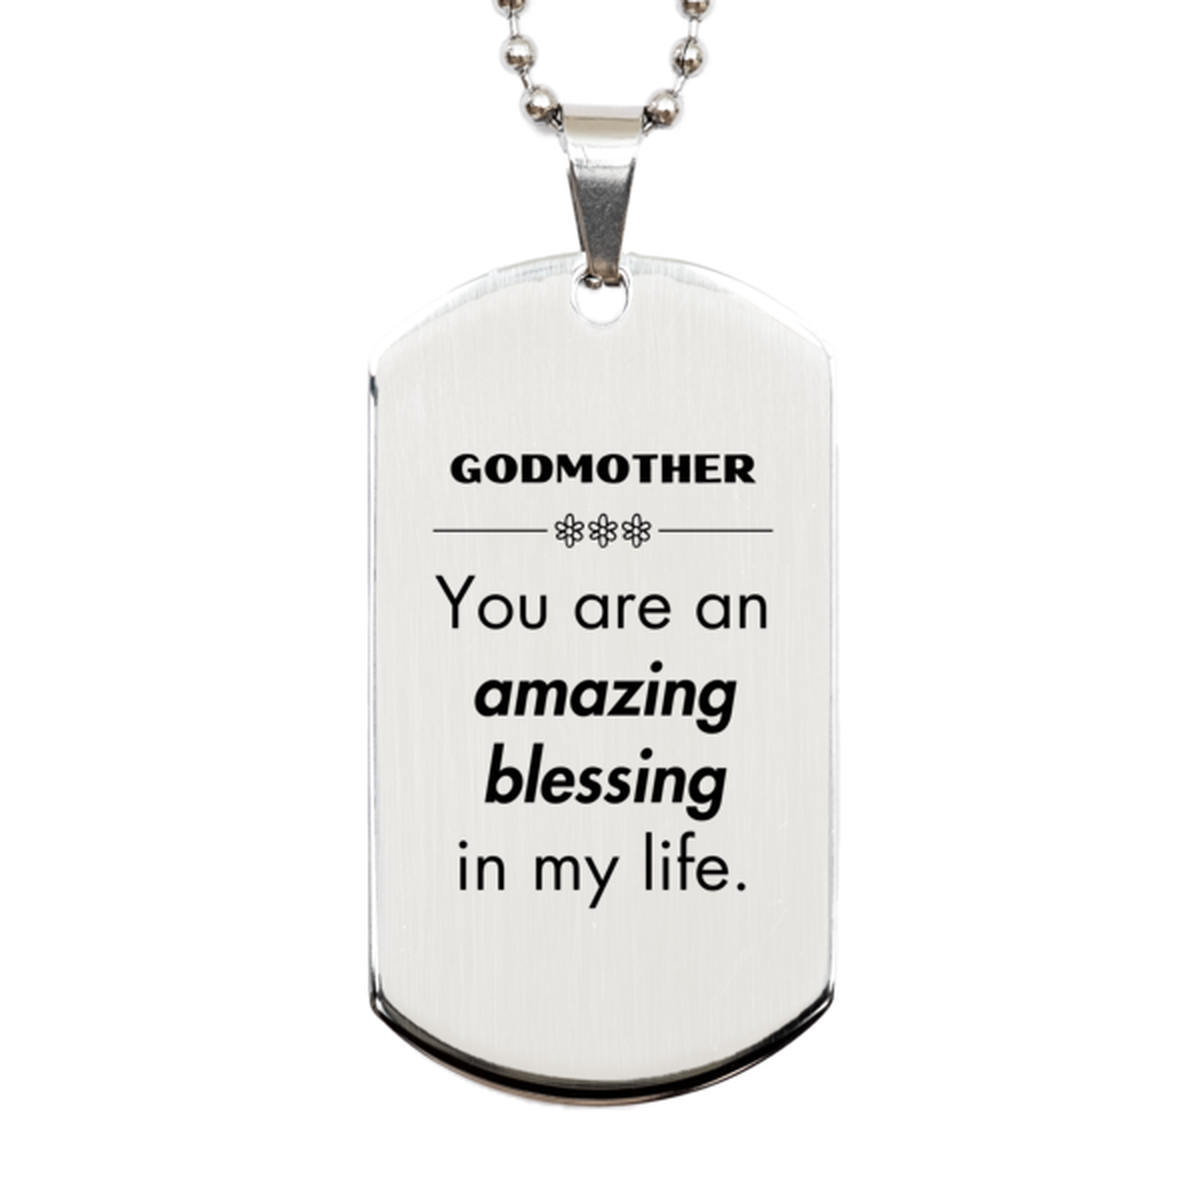 Godmother Silver Dog Tag, You are an amazing blessing in my life, Thank You Gifts For Godmother, Inspirational Birthday Christmas Unique Gifts For Godmother